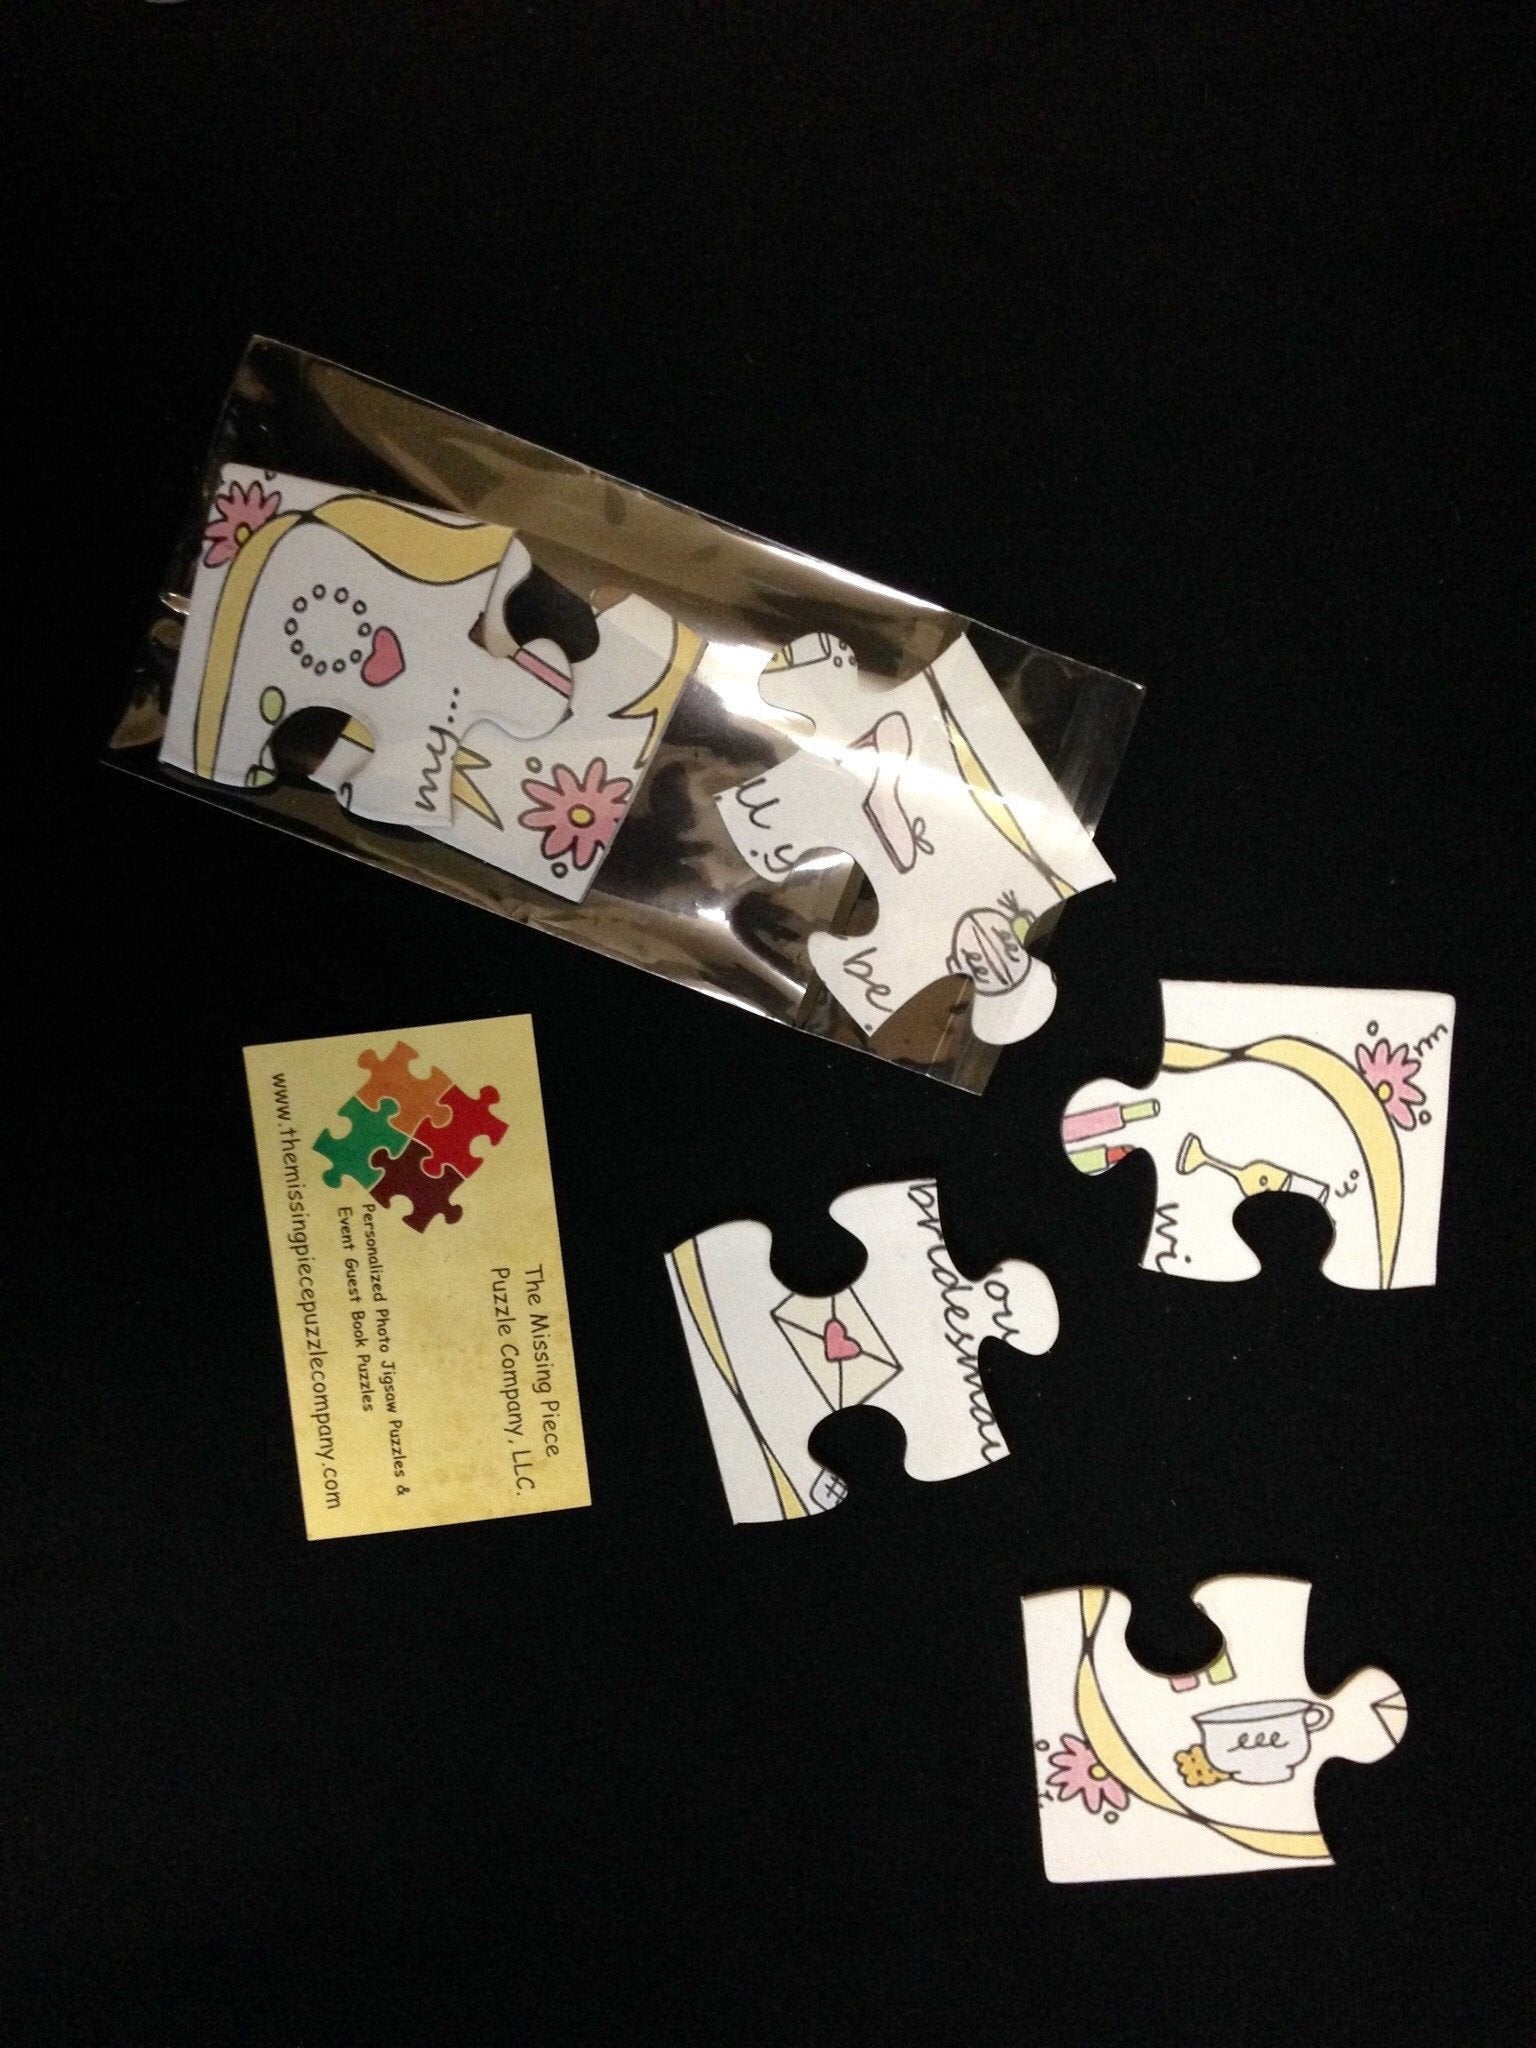 YOUR DESIGN on a SET of Custom Invitation Post Card Size Puzzles.  10 puzzles per Package. The Missing Piece Puzzle Company